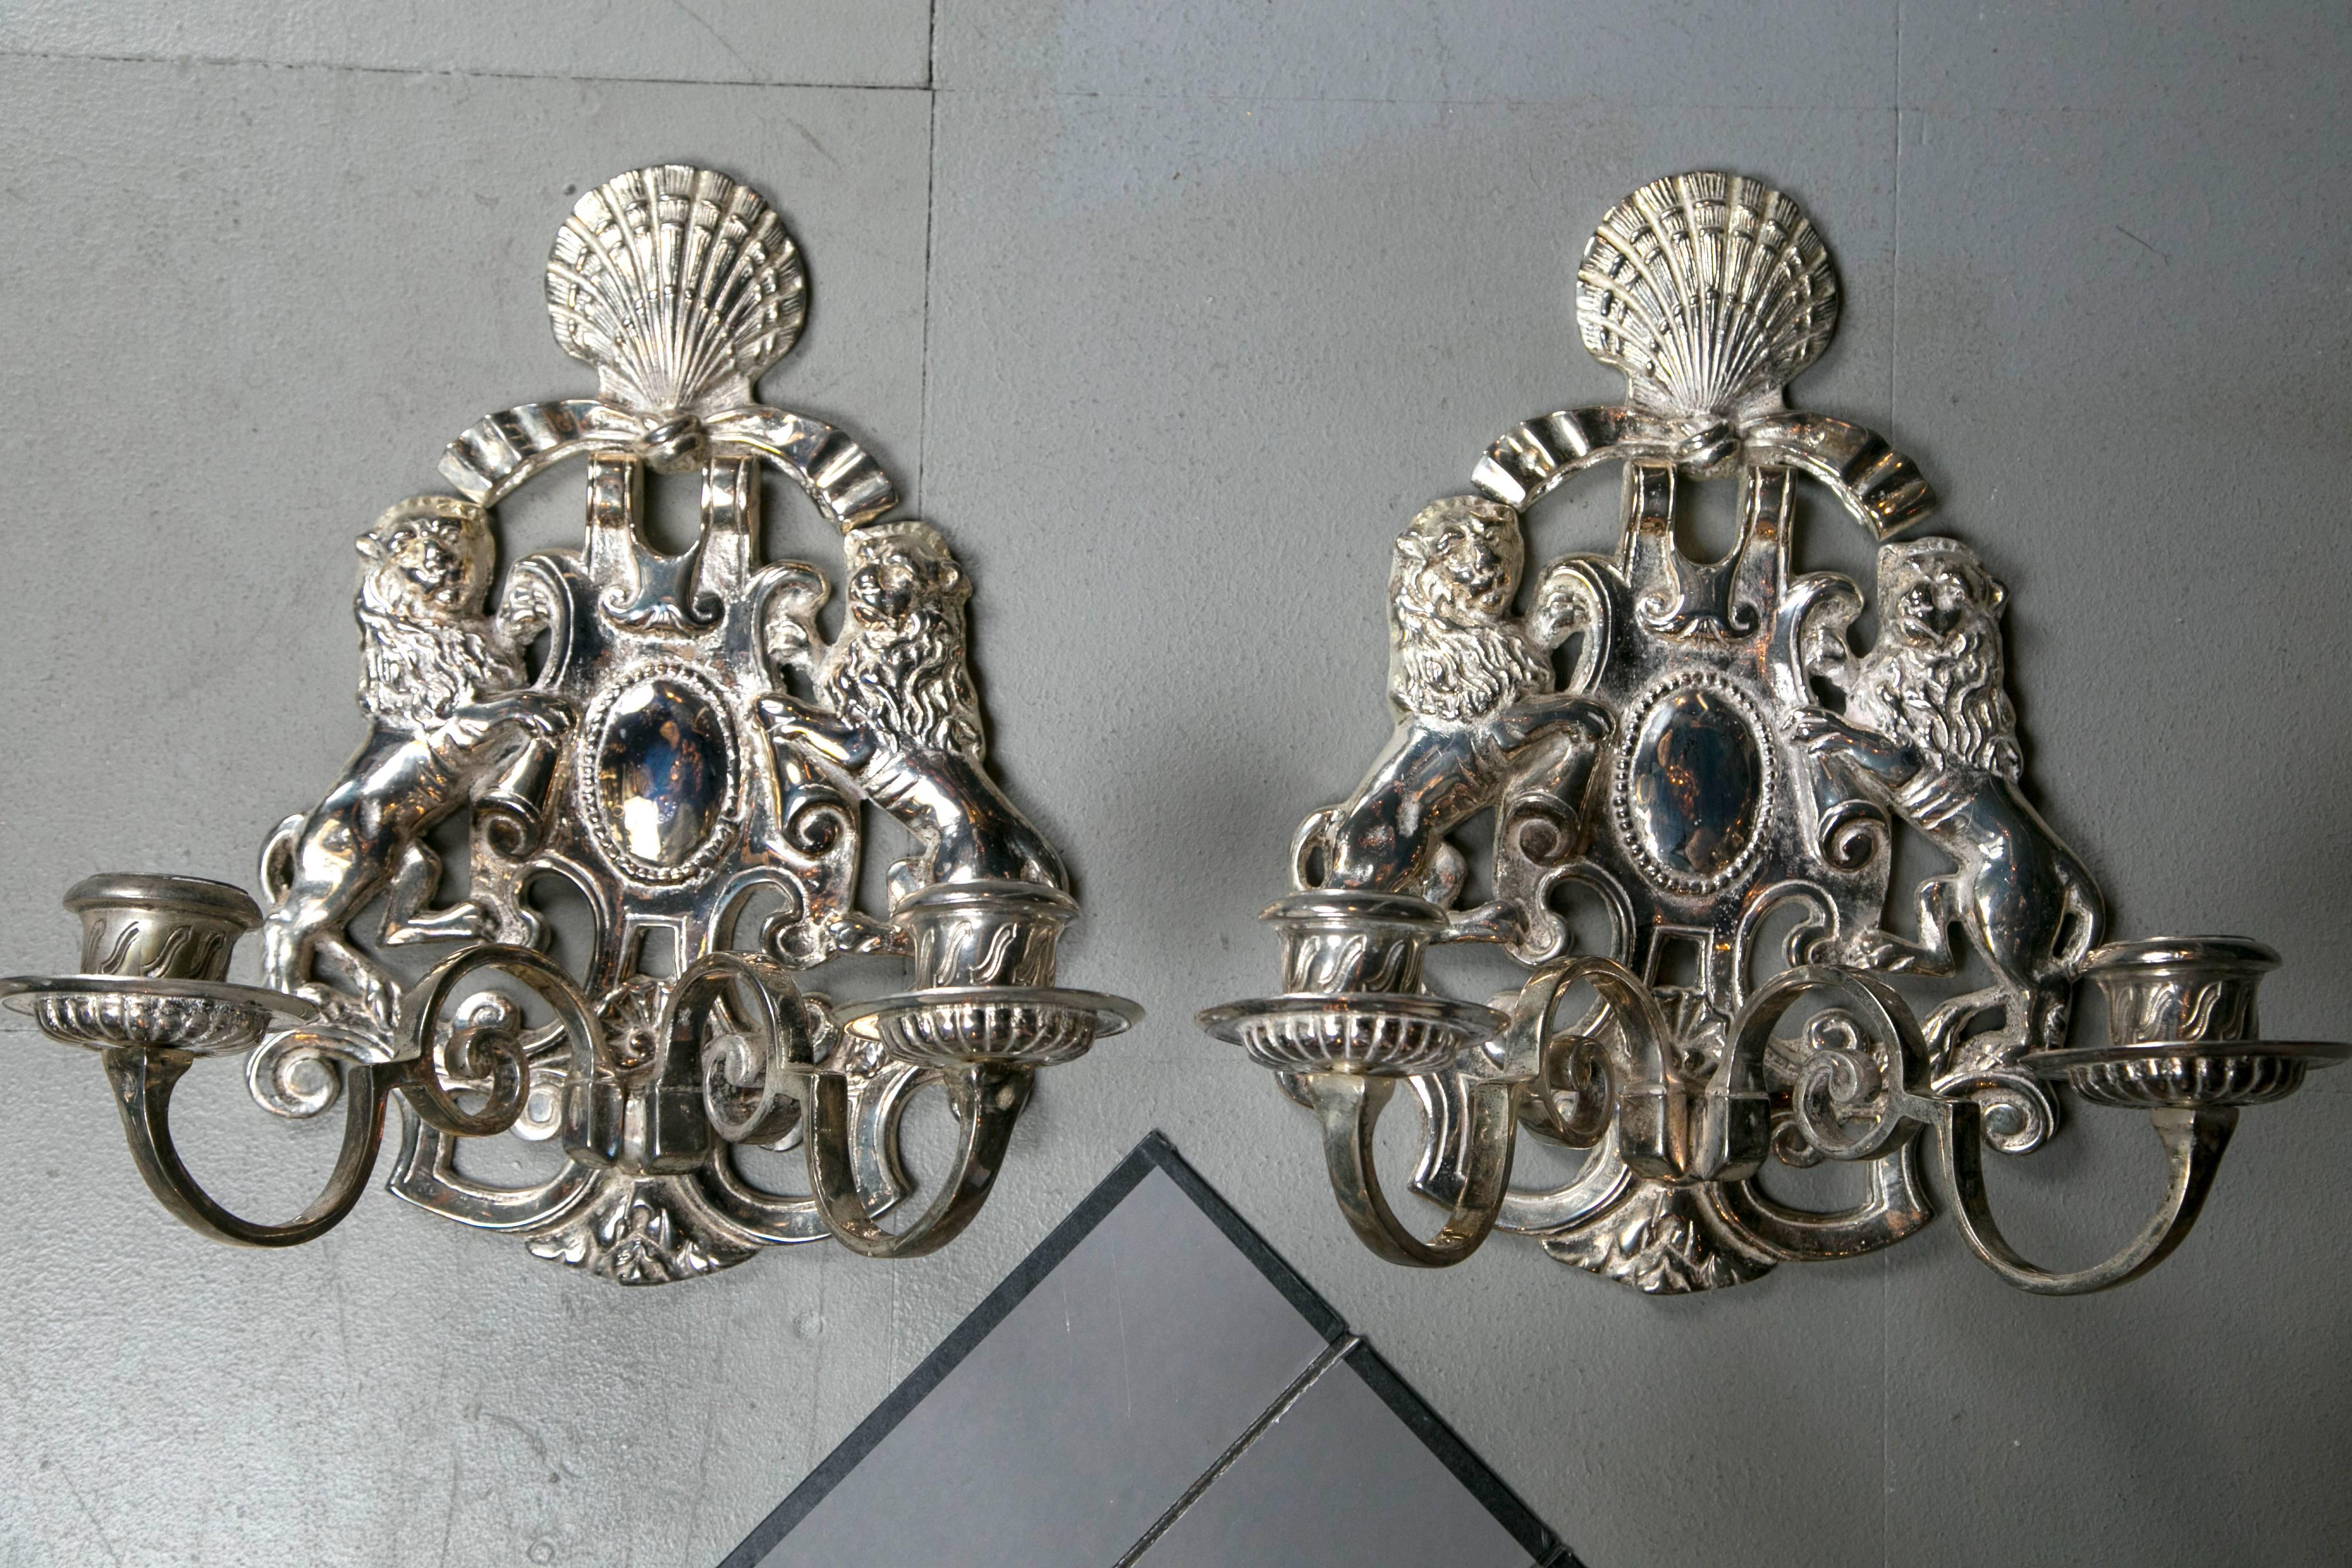 A fabulous set of silver plated Caldwell sconces three pair available, priced per pair.